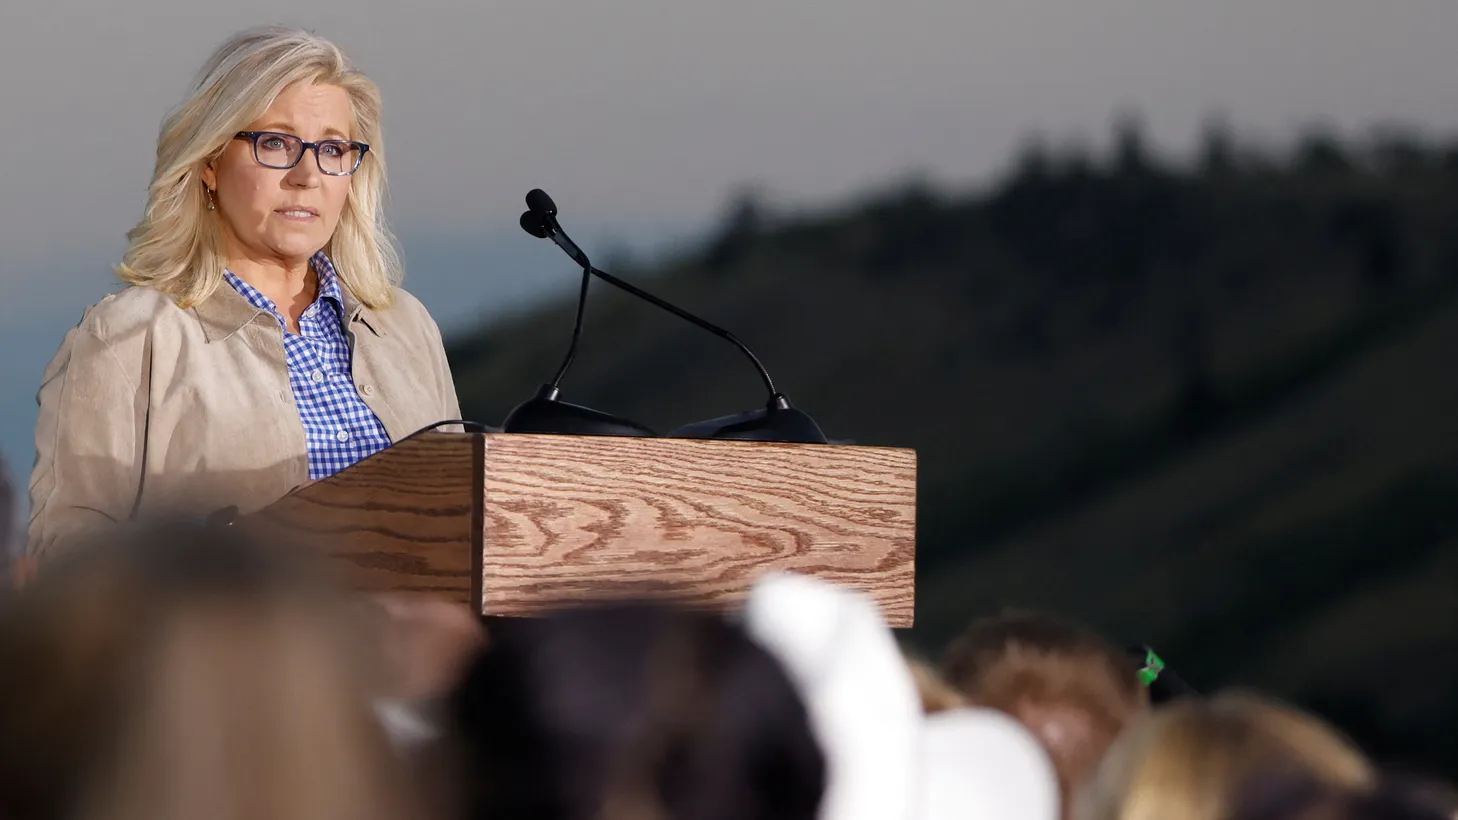 Republican candidate U.S. Representative Liz Cheney speaks during her primary election night party in Jackson, Wyoming, U.S. August 16, 2022.